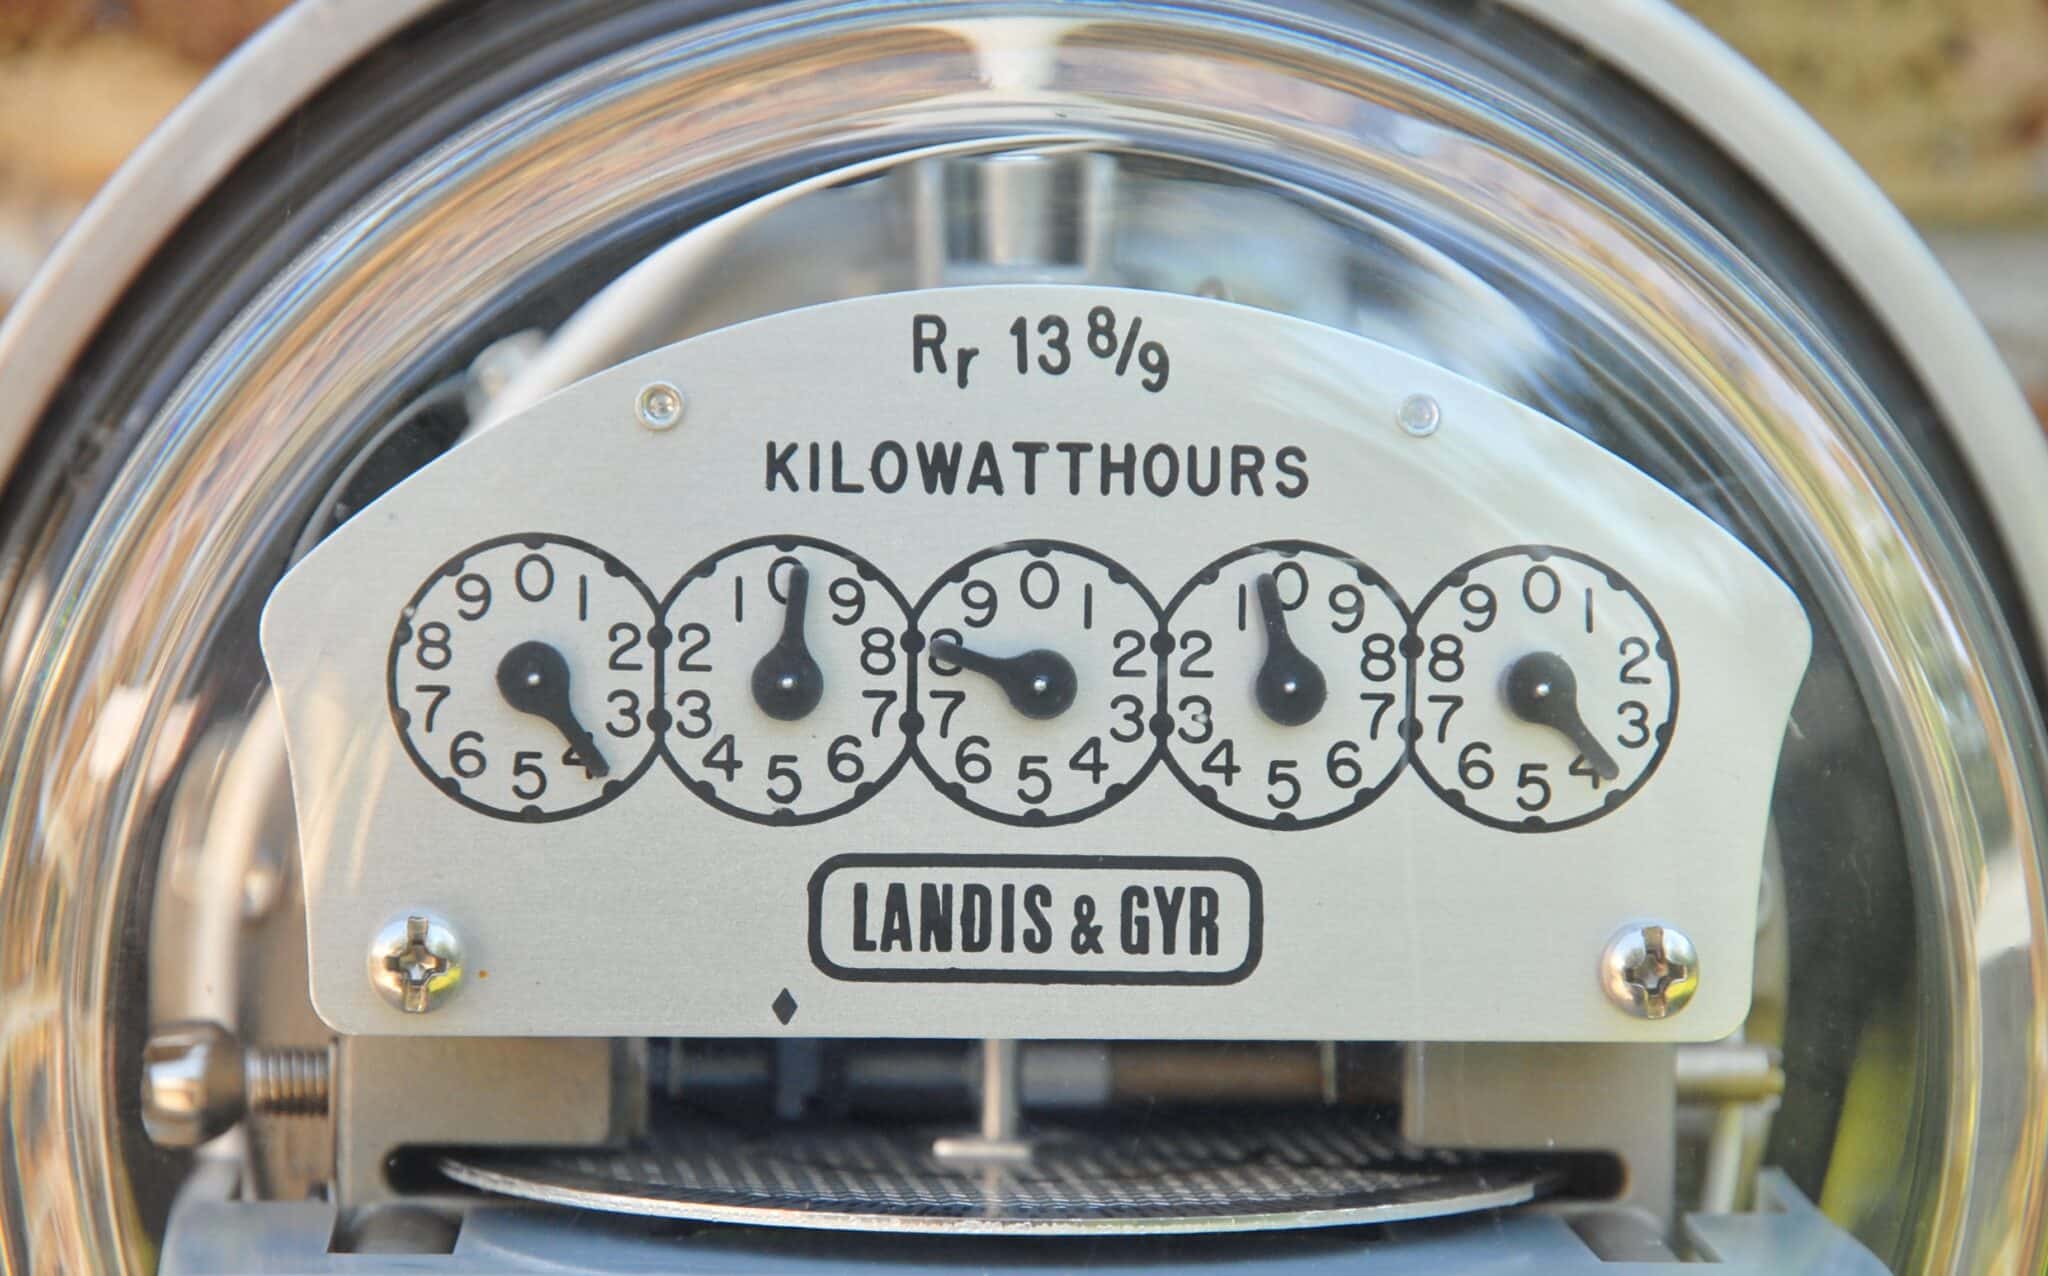 Net metering essentially lets your meter run backwards when you overproduce